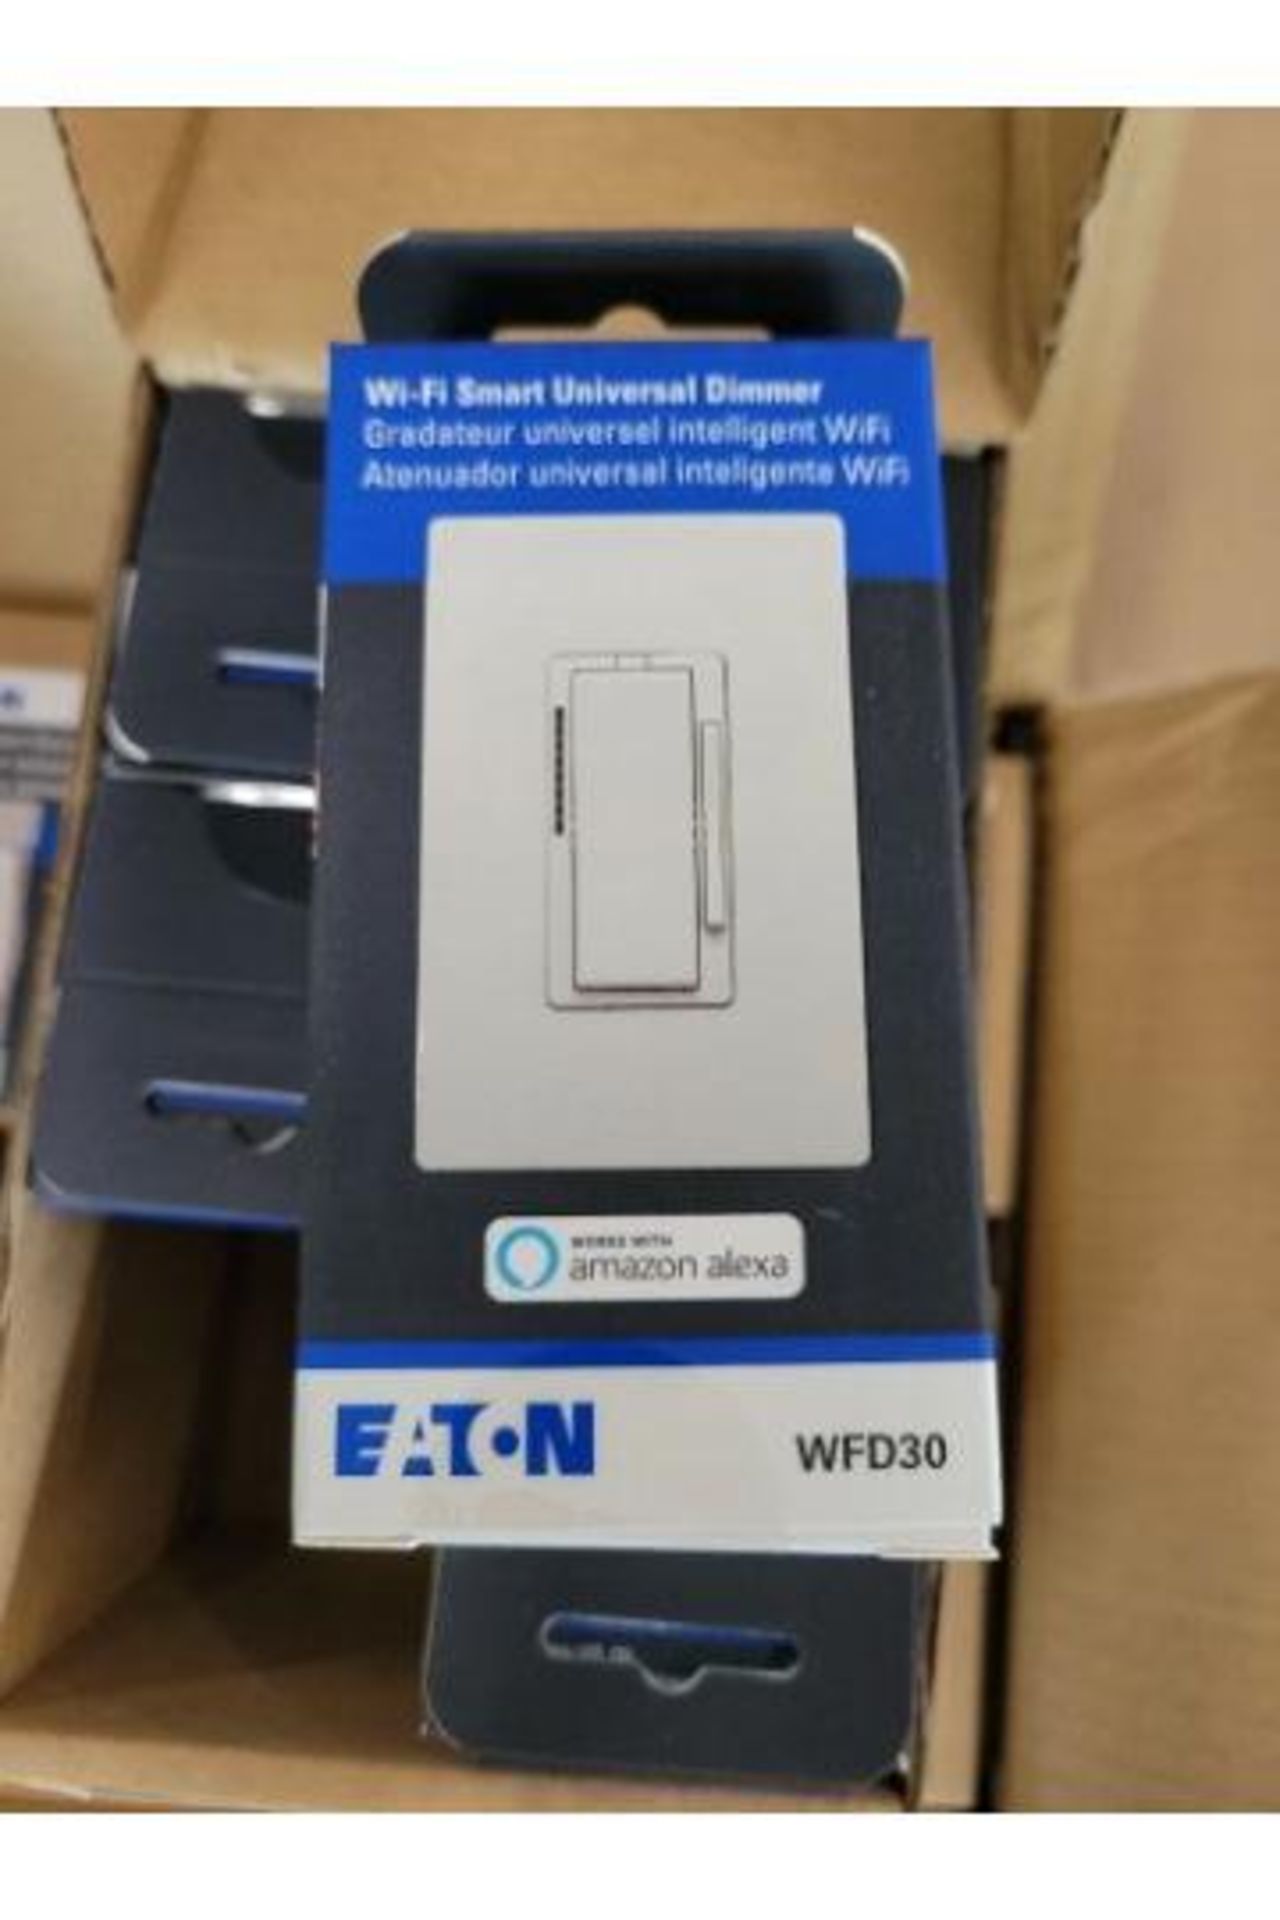 36x Eaton WFD30-W-SP-L Light and Dimmer Switches WiFi Smart Switch 125V 60Hz White - Image 4 of 4